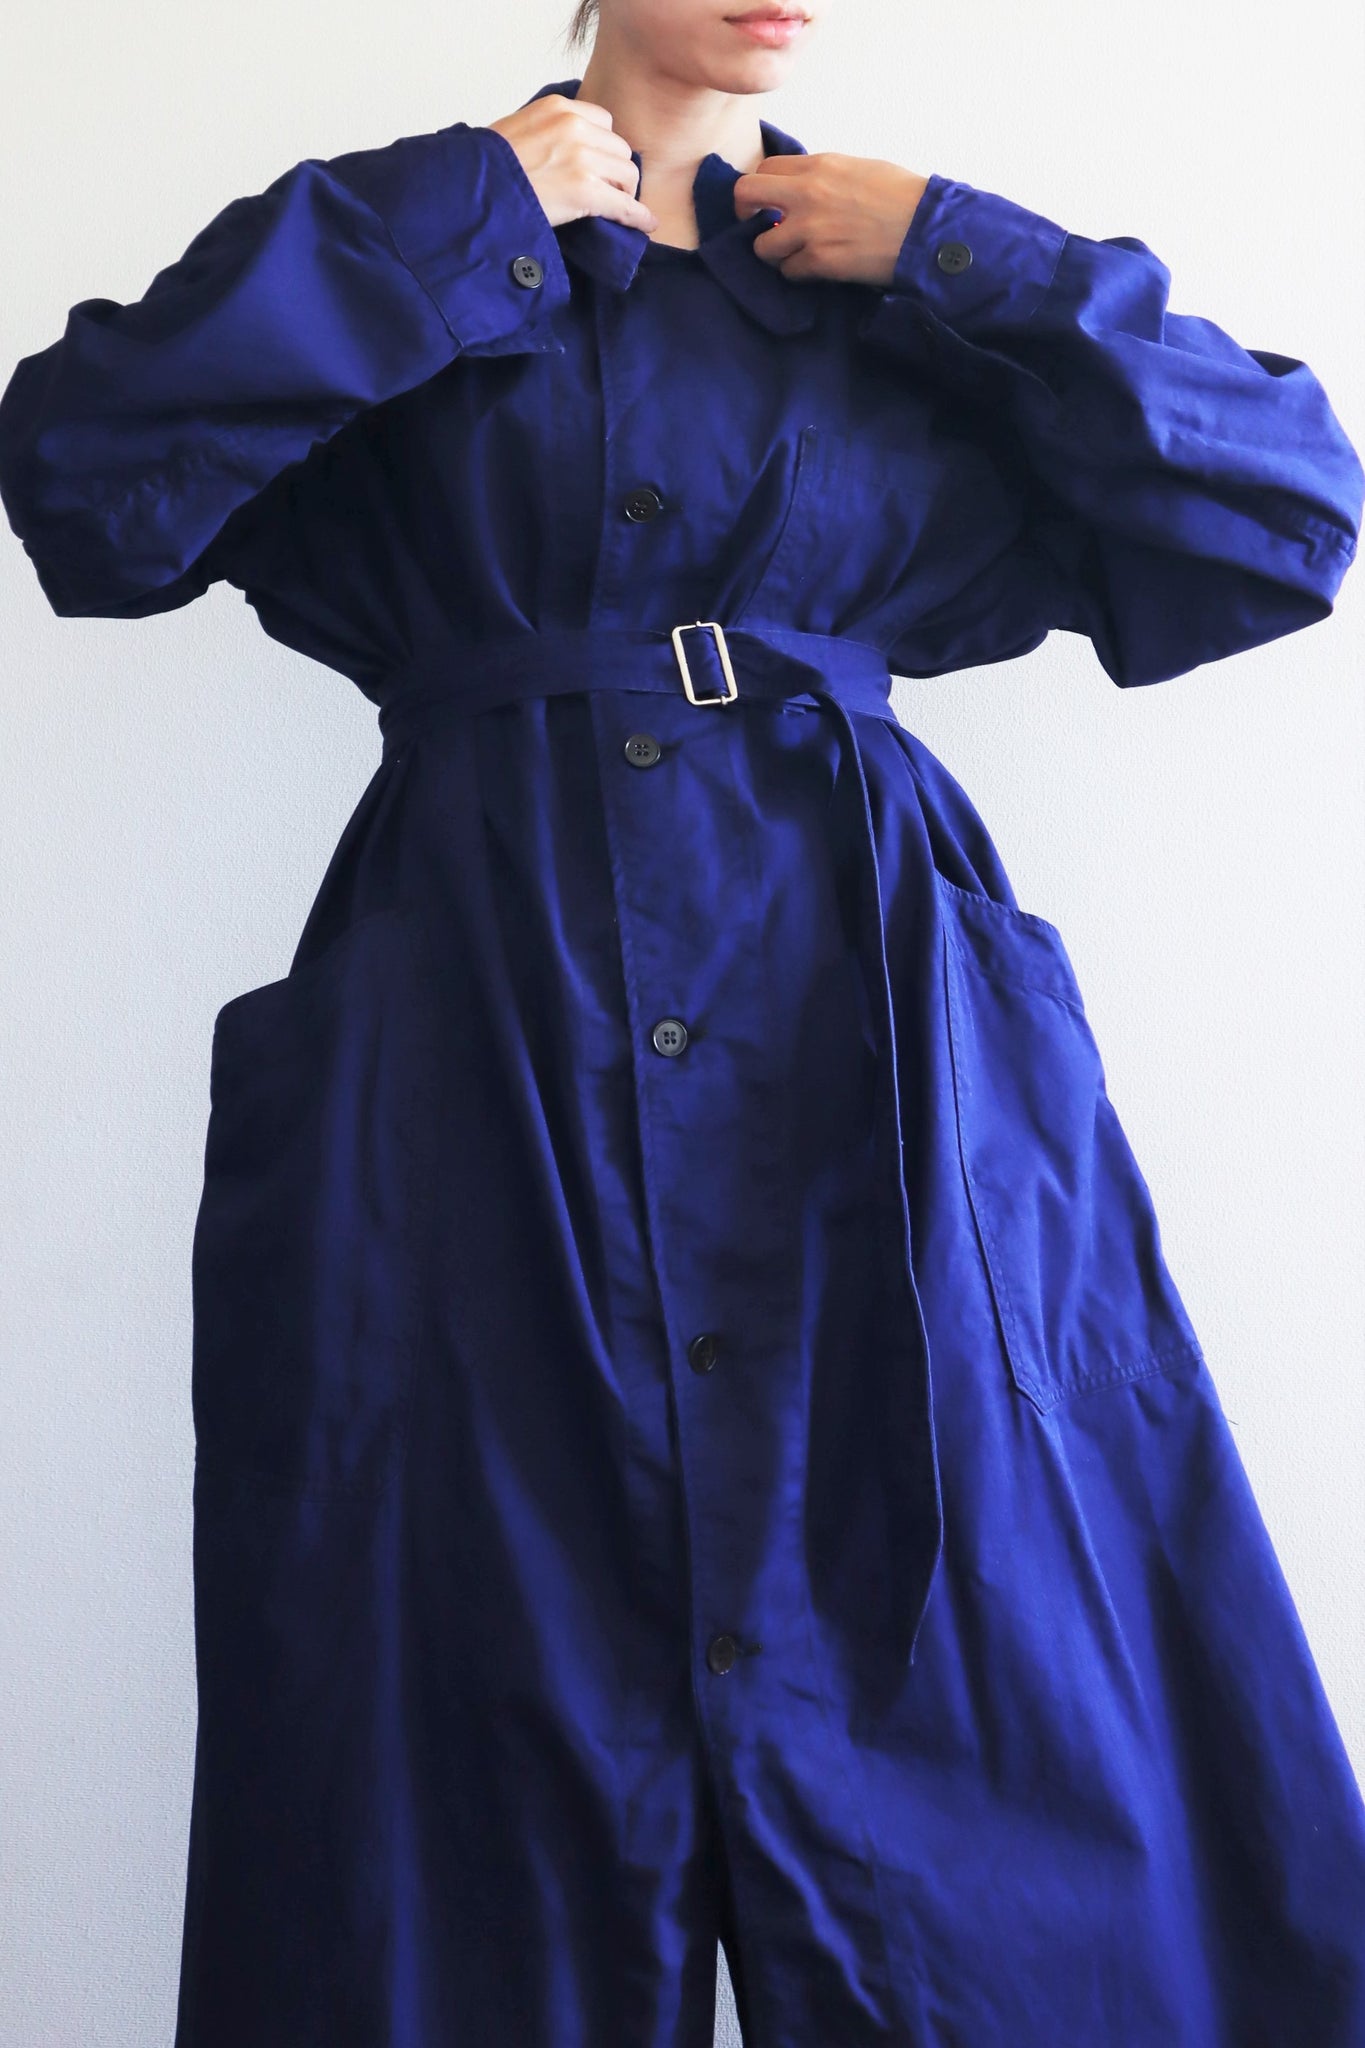 1960s Deadstock French Army Motoring Duster Coat